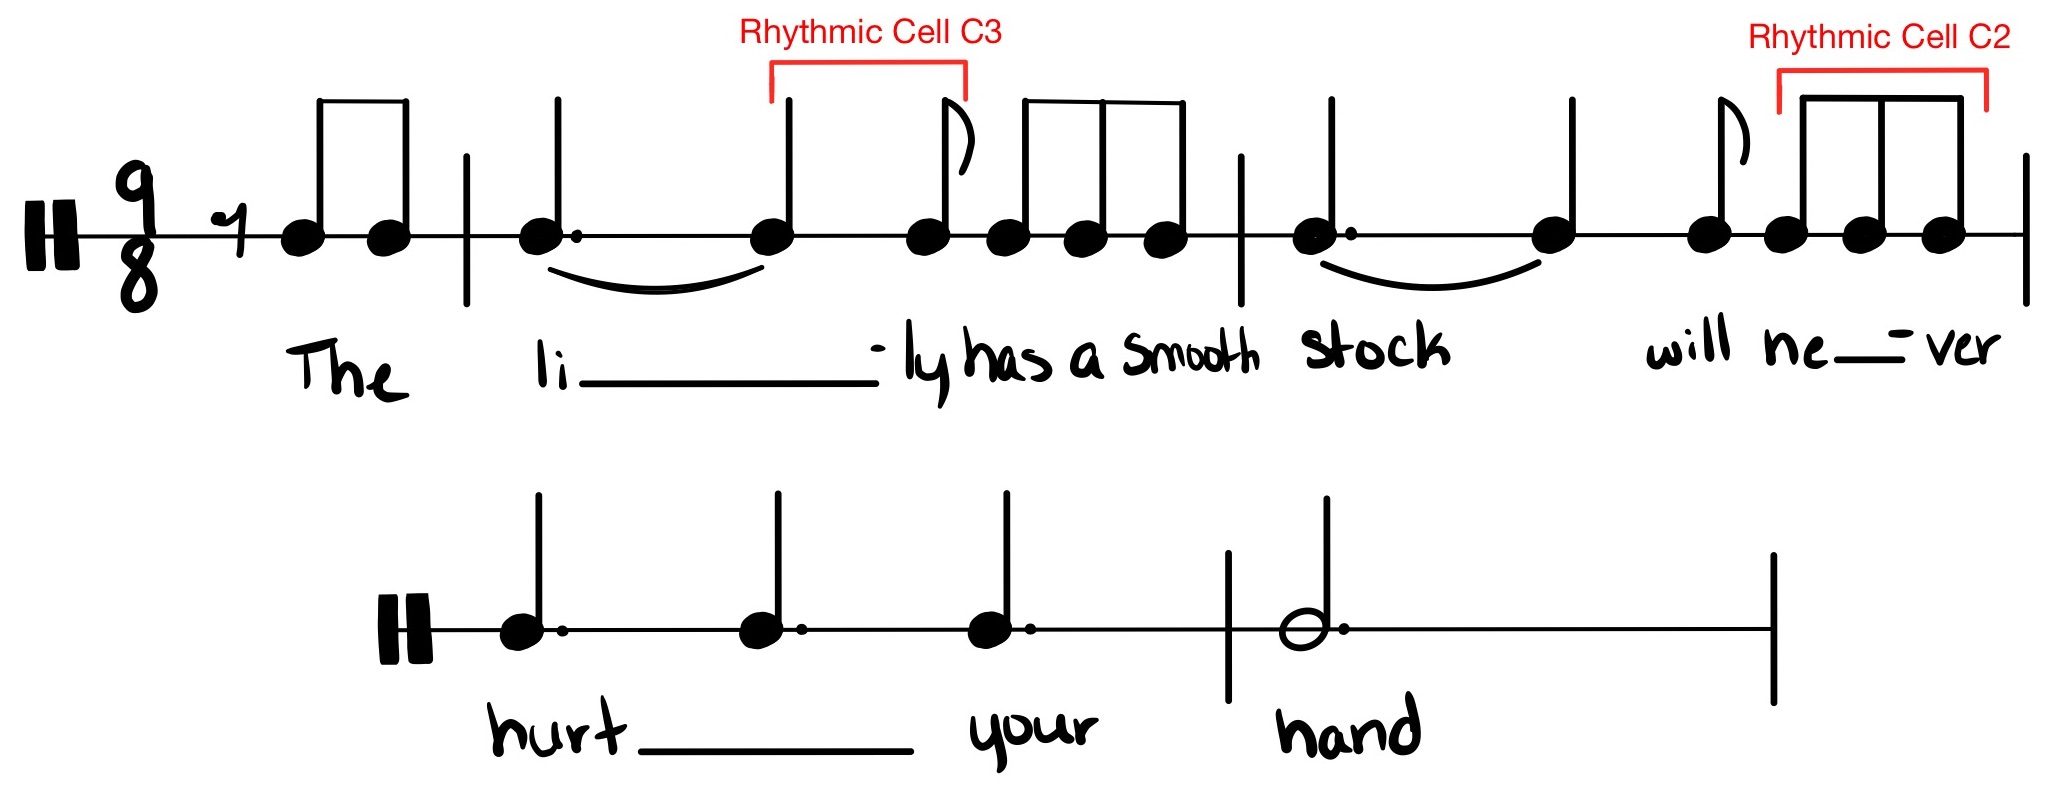 Traditional staff notation on a one-line percussion staff for the rhythms of 0:18–0:31 of the song “The Rose.” The notation is in “nine-eight” meter. The notes are all written on the single line of the staff, without regard to changing pitch. Rhythmic cells C3 and C2 from the chapter on Rhythm Skills (quarter note-eighth note and three eighth notes) are bracketed and labelled. The lyrics are written below the noteheads.